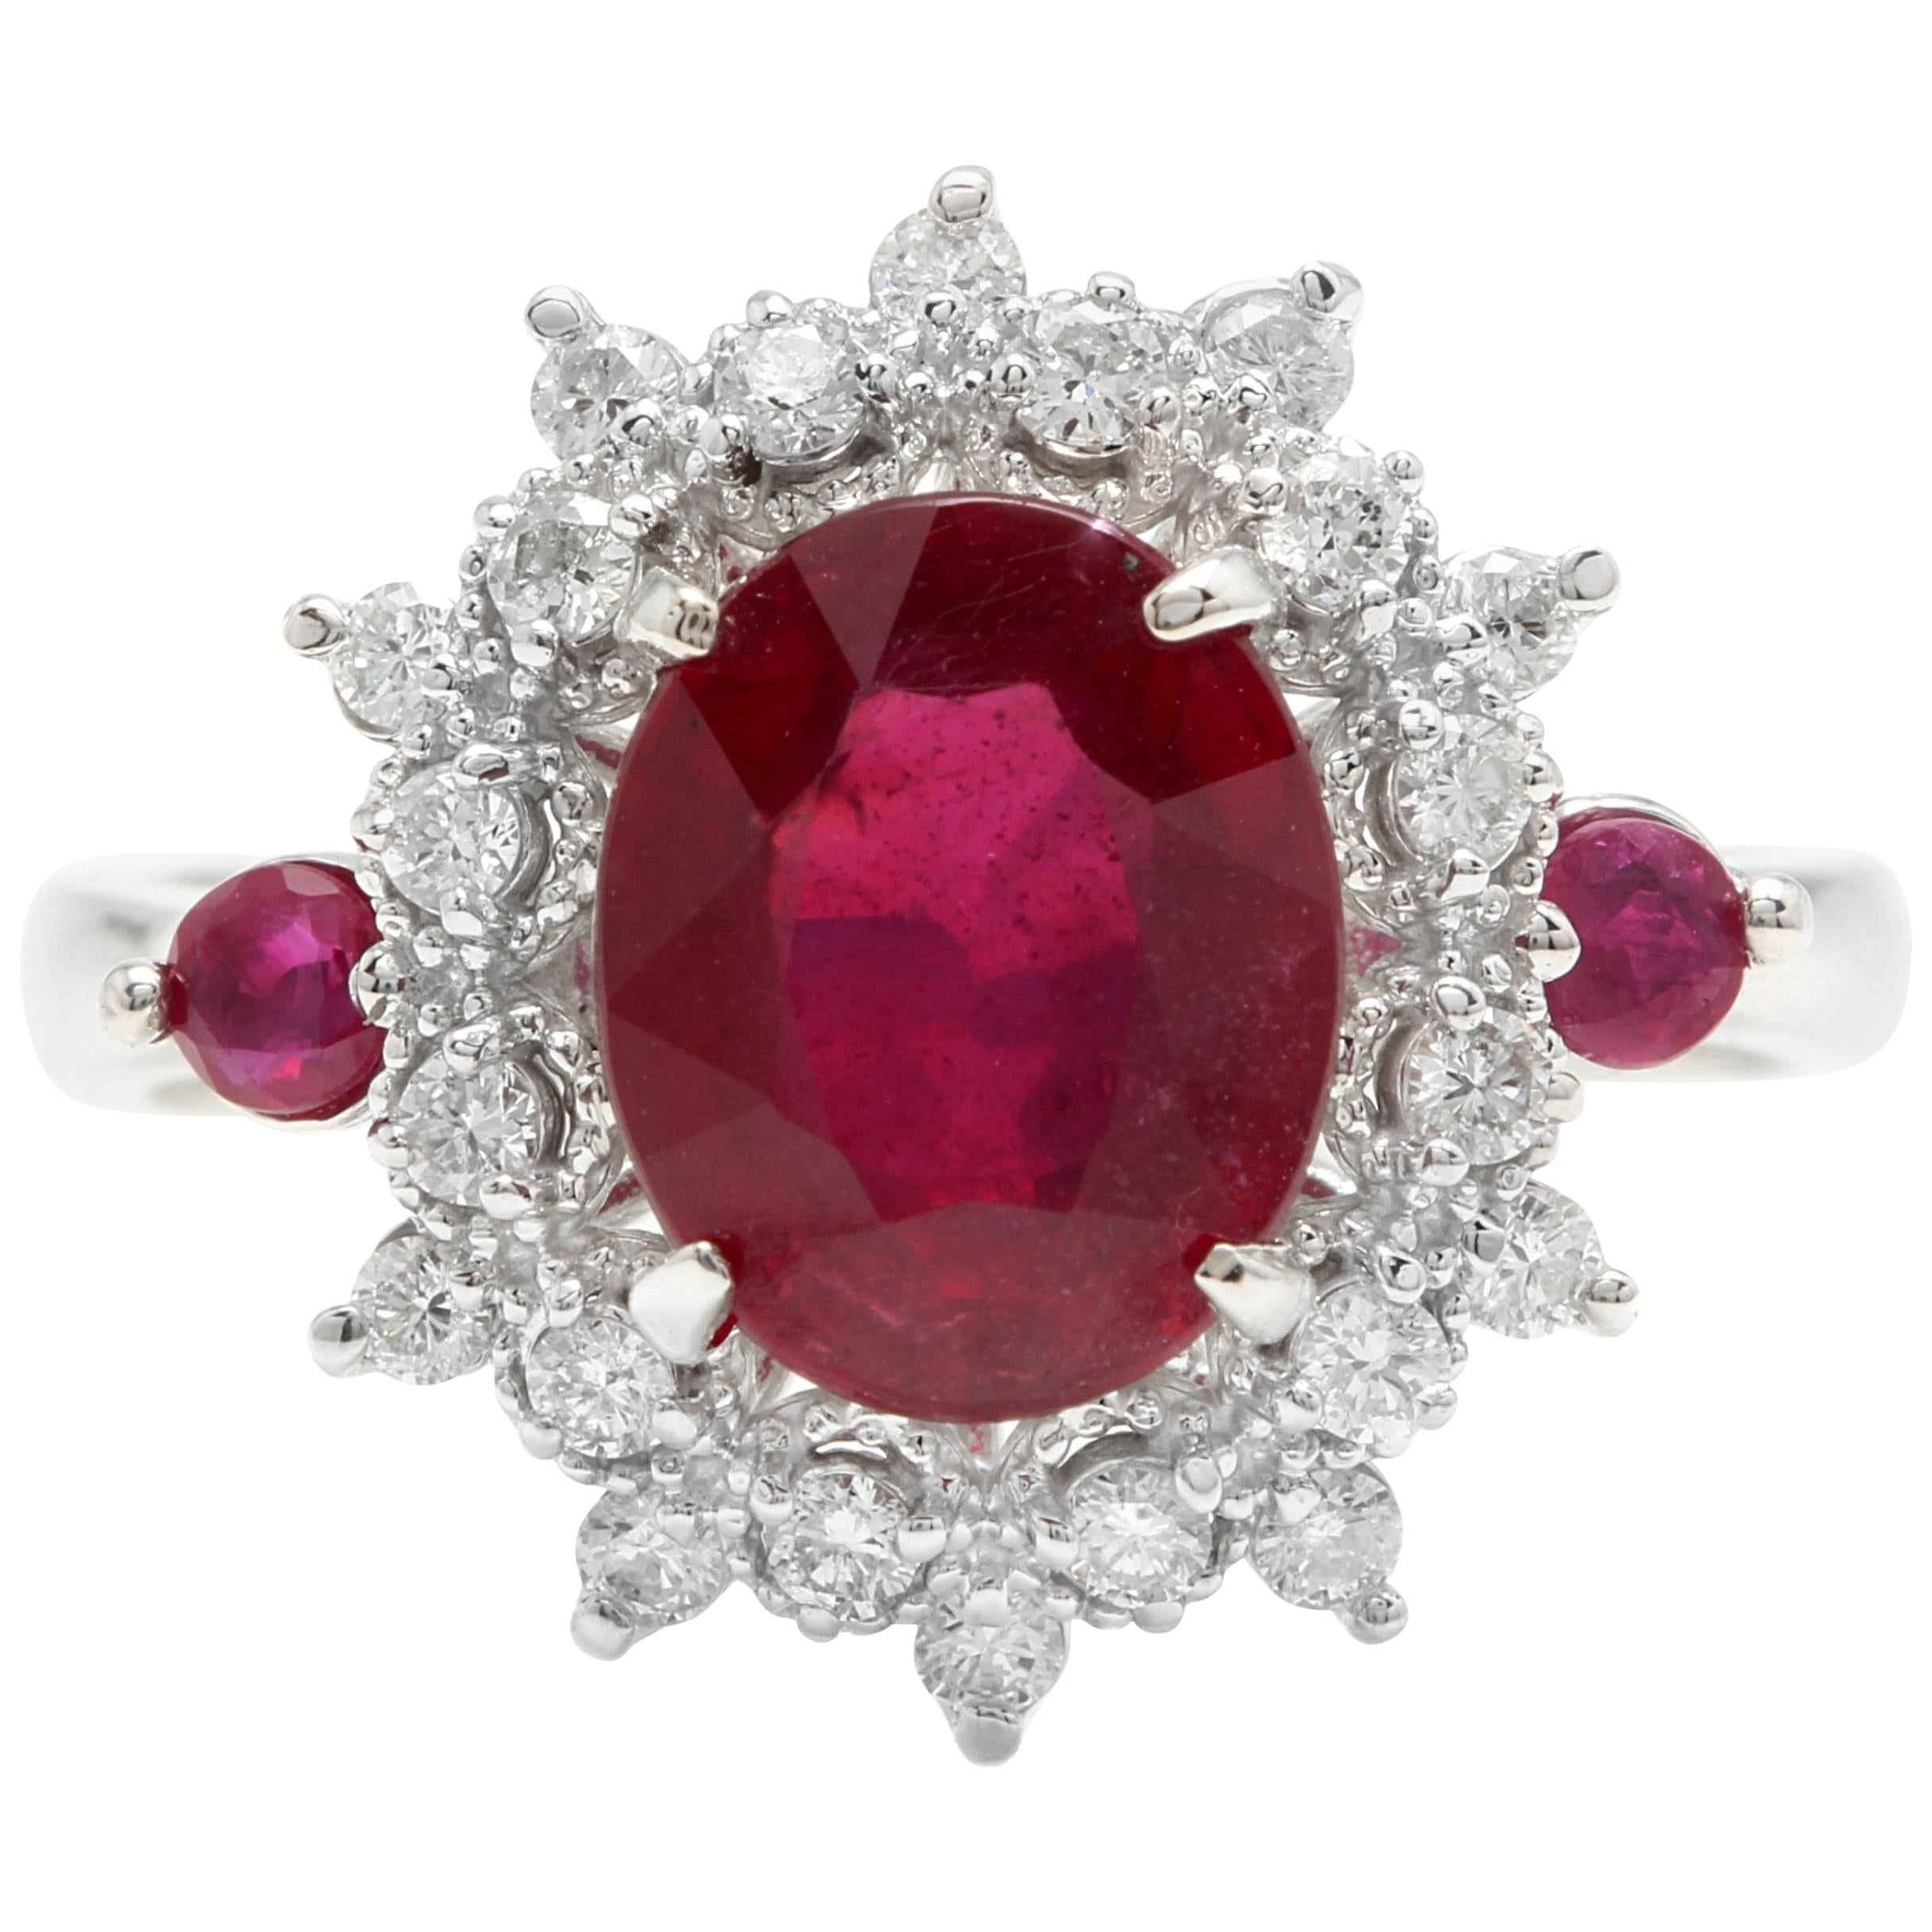 6.65 Carat Natural Red Ruby and Diamond 14 Karat Solid White Gold Ring